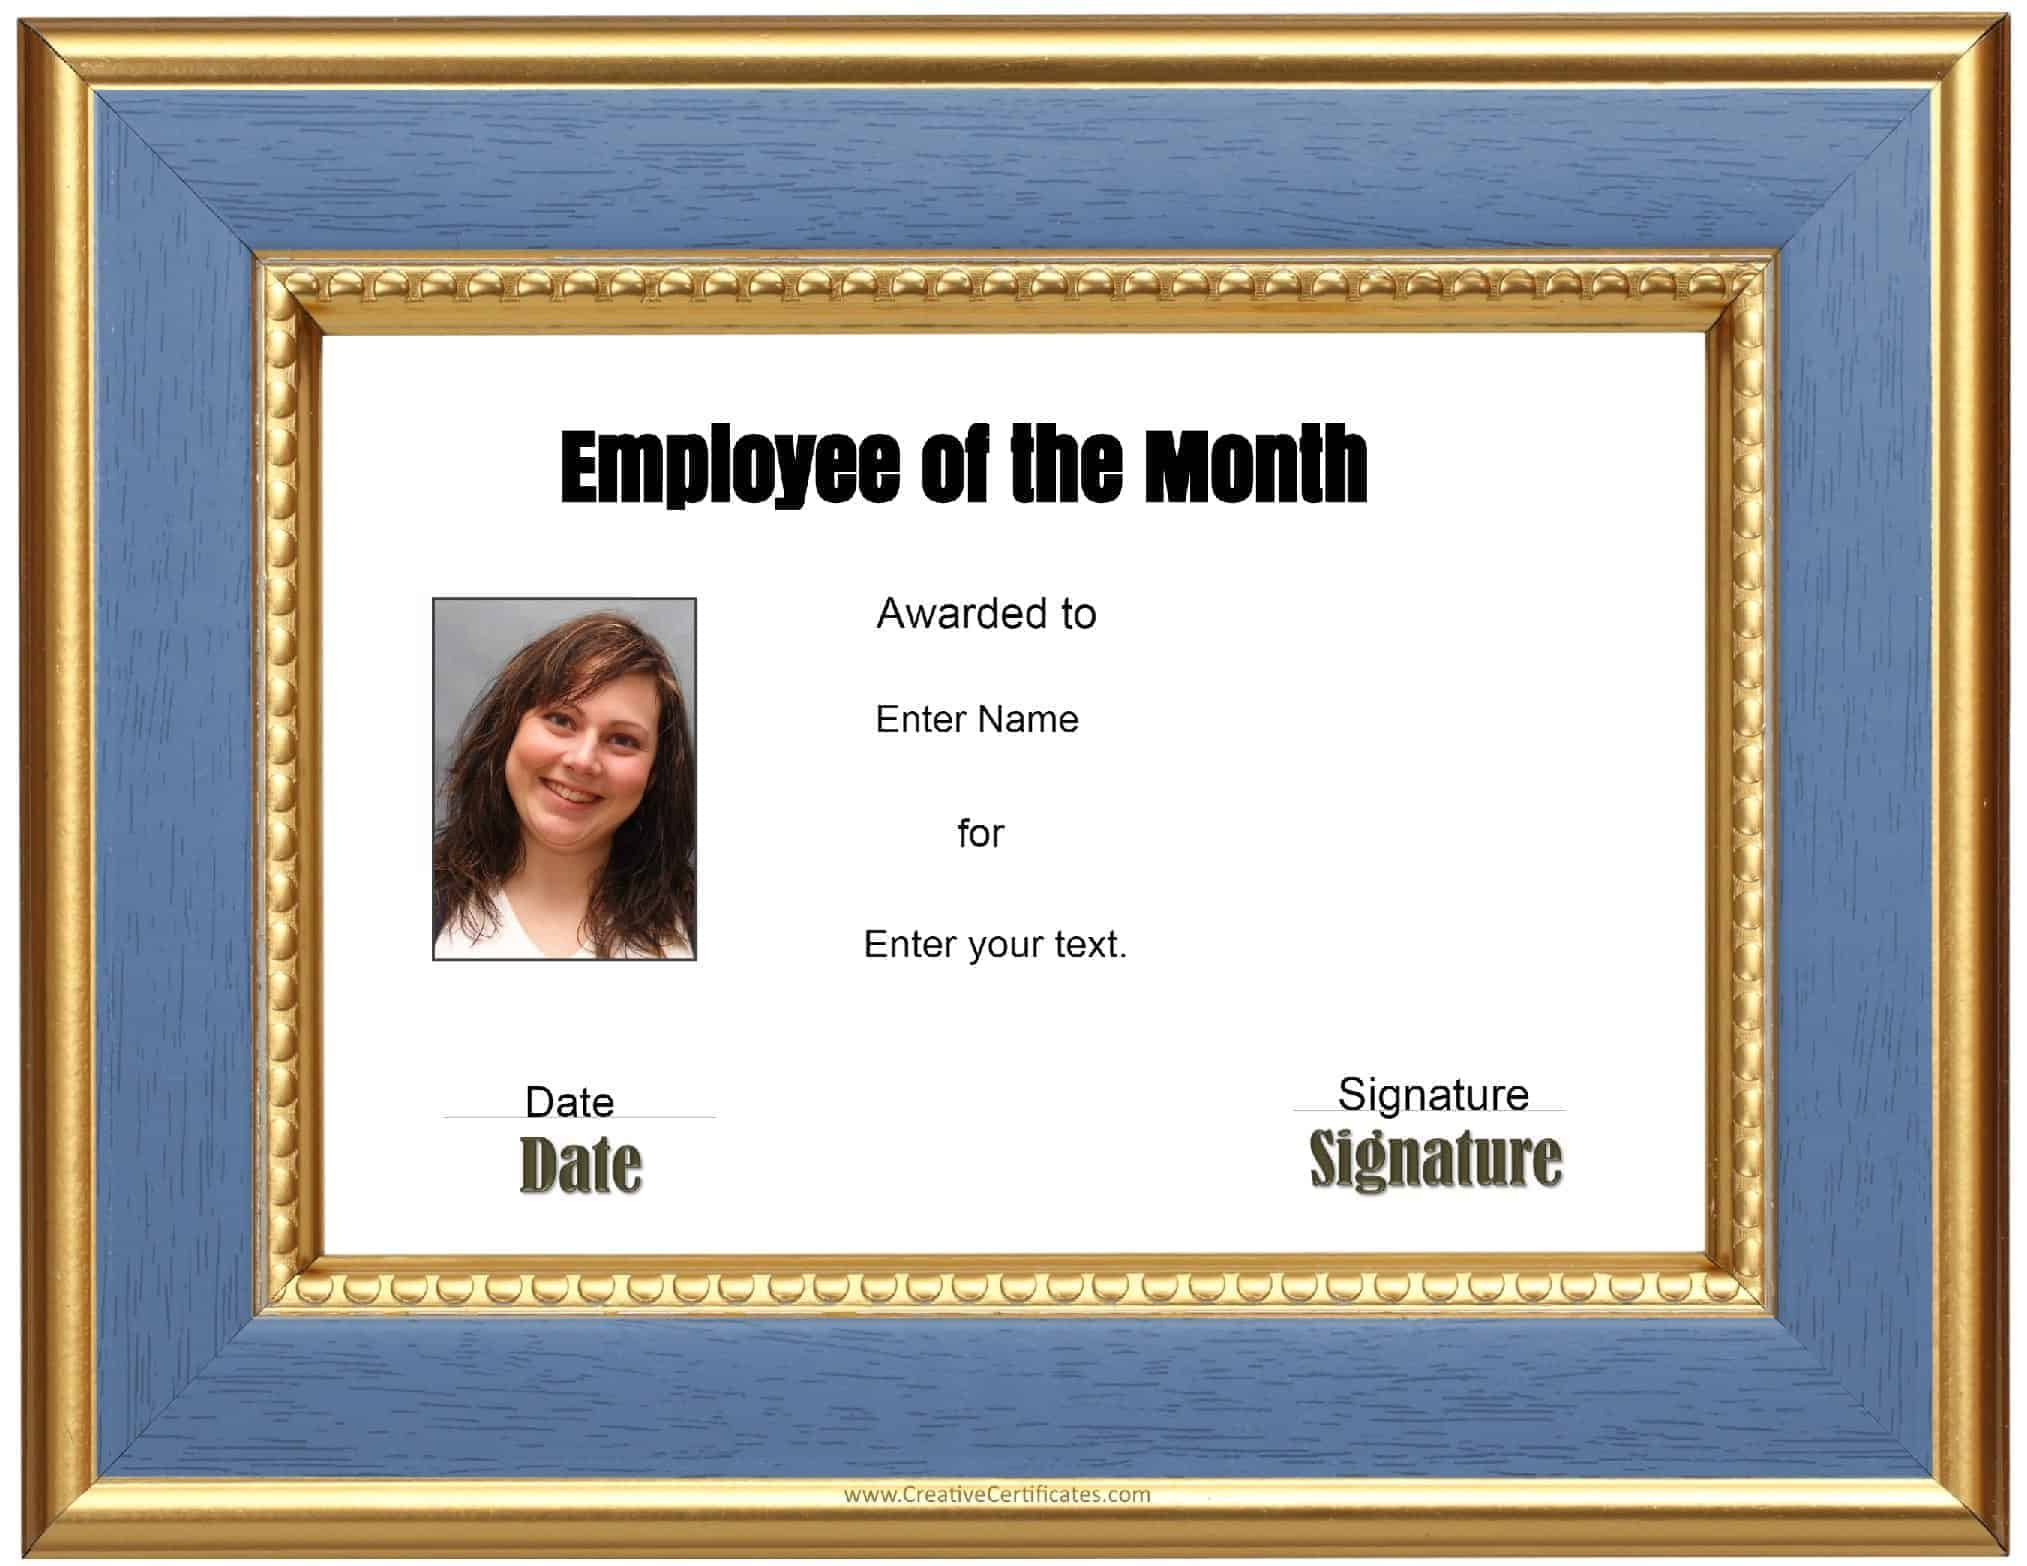 Free Custom Employee of the Month Certificate With Employee Of The Month Certificate Template With Picture